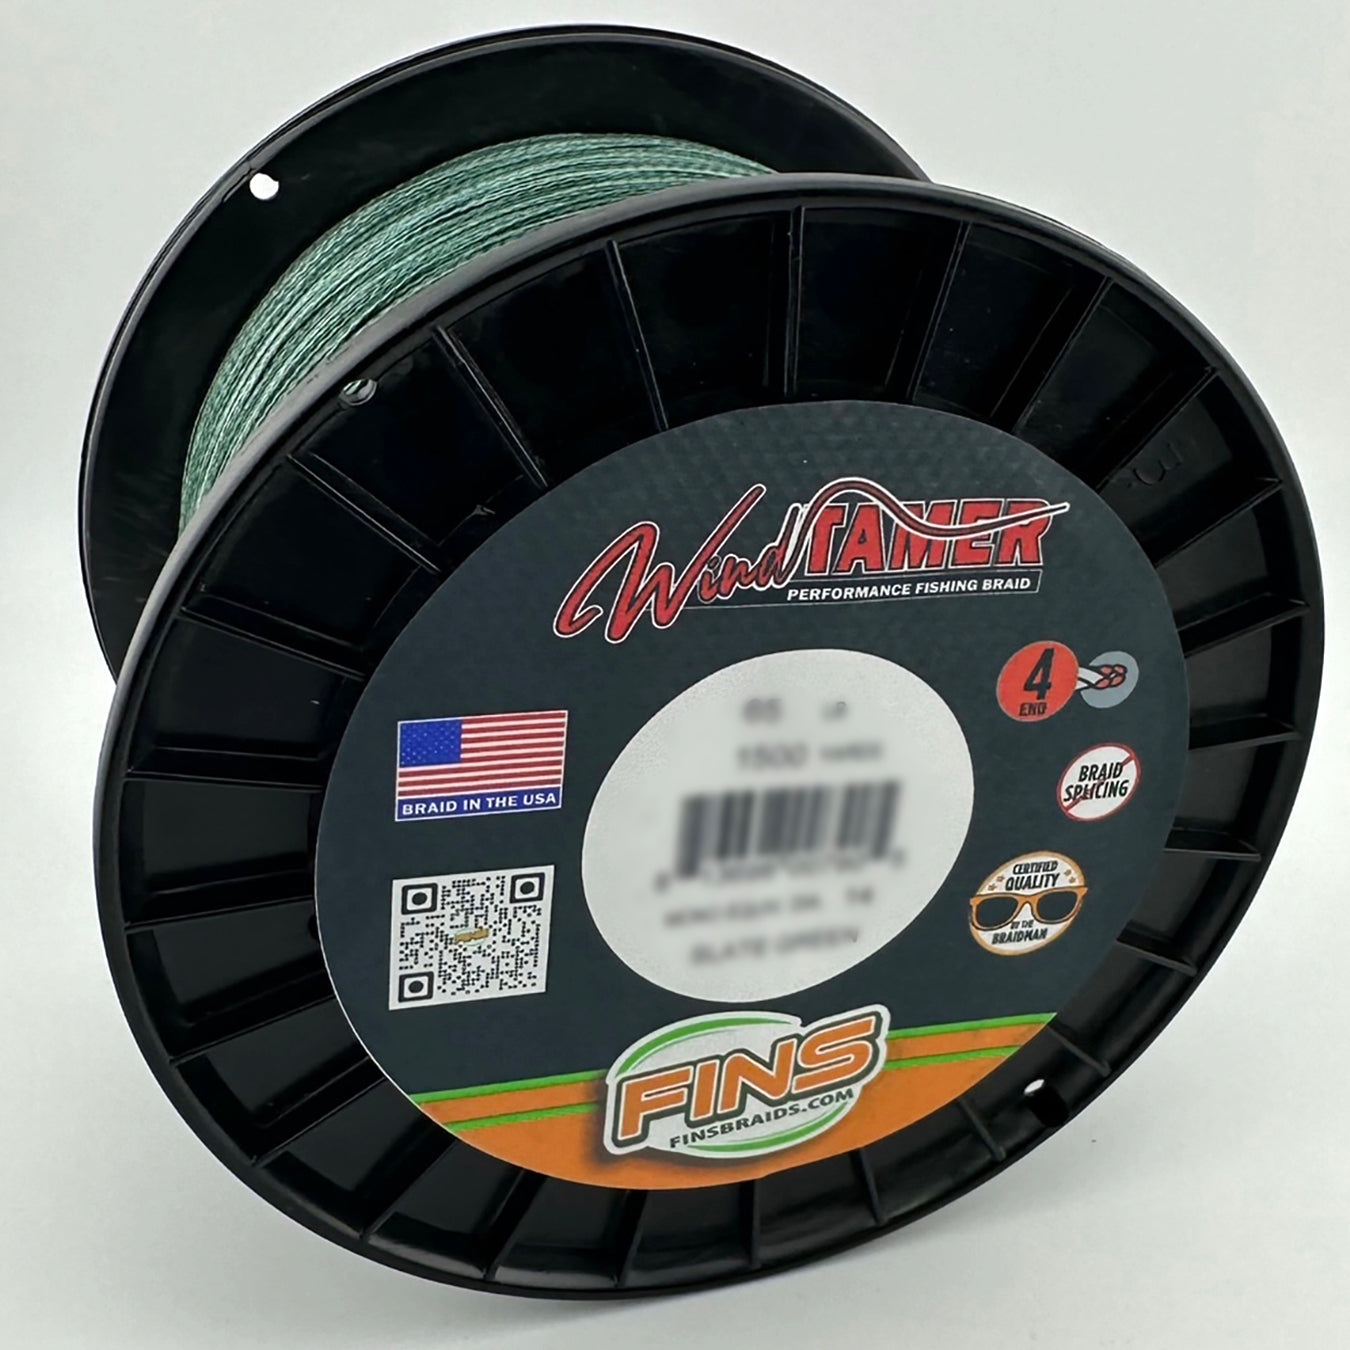 POWER PRO Spectra Braided Fishing Line 40Lb 500Yds Green